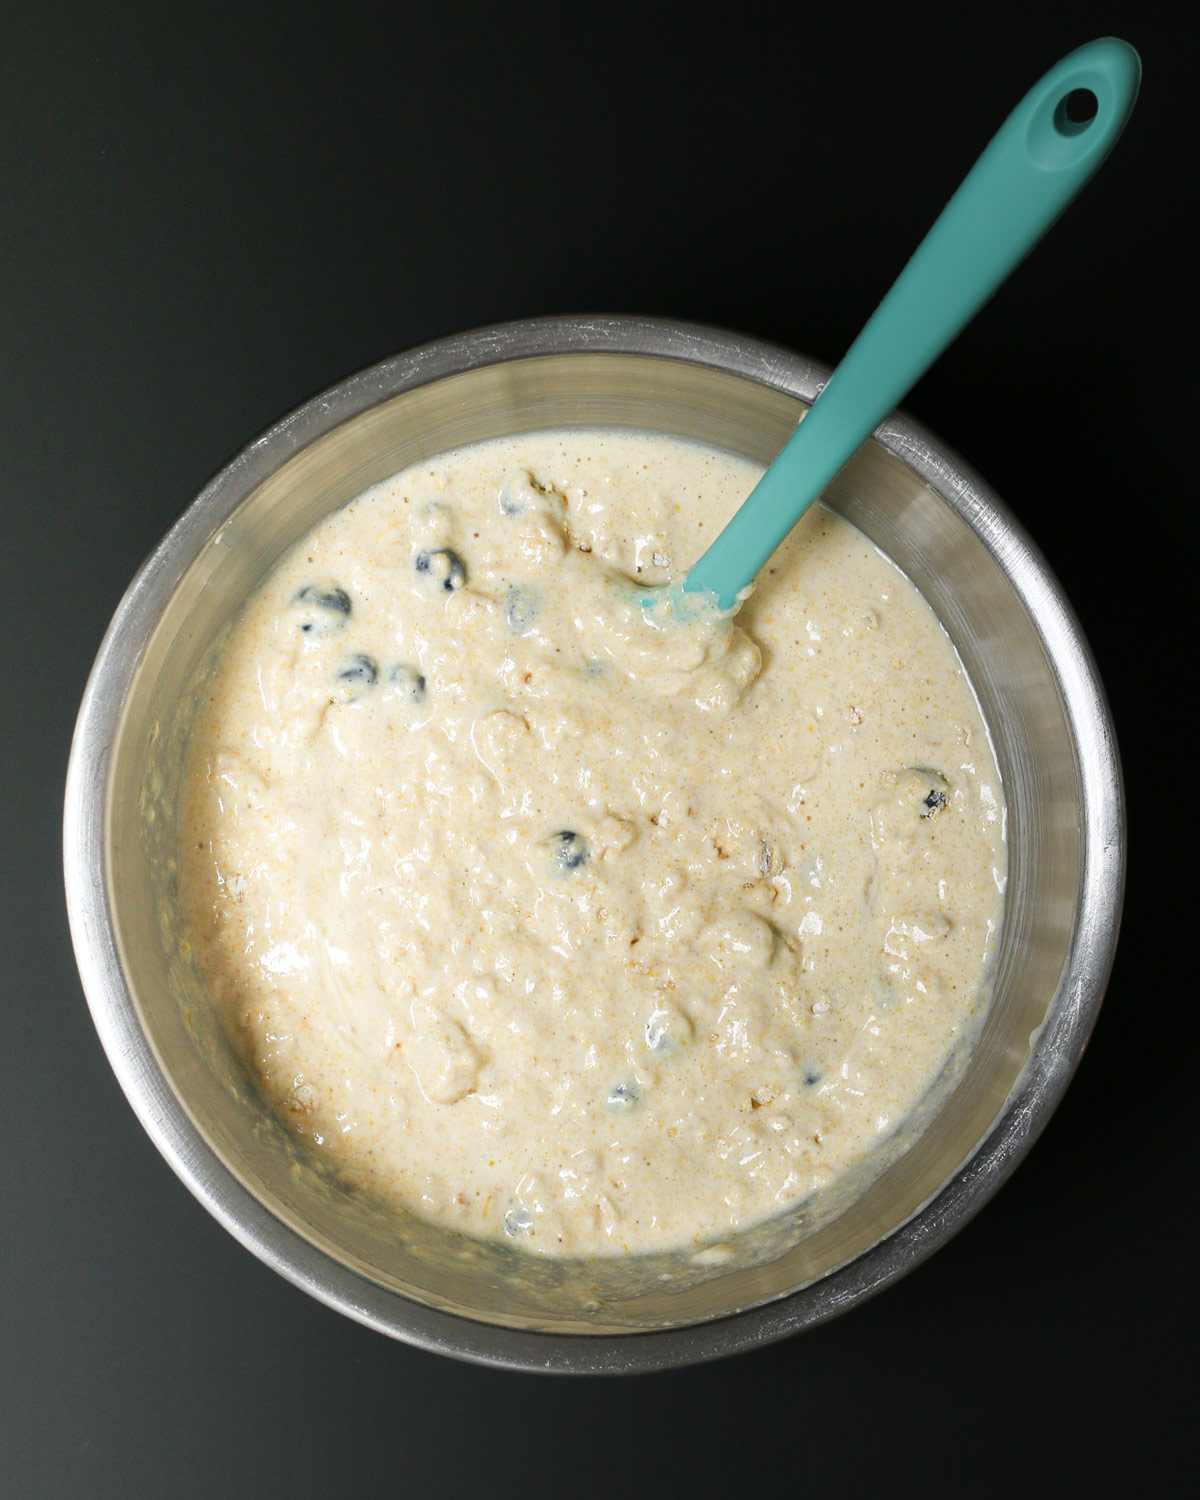 teal spatula submerged in the mixed batter.